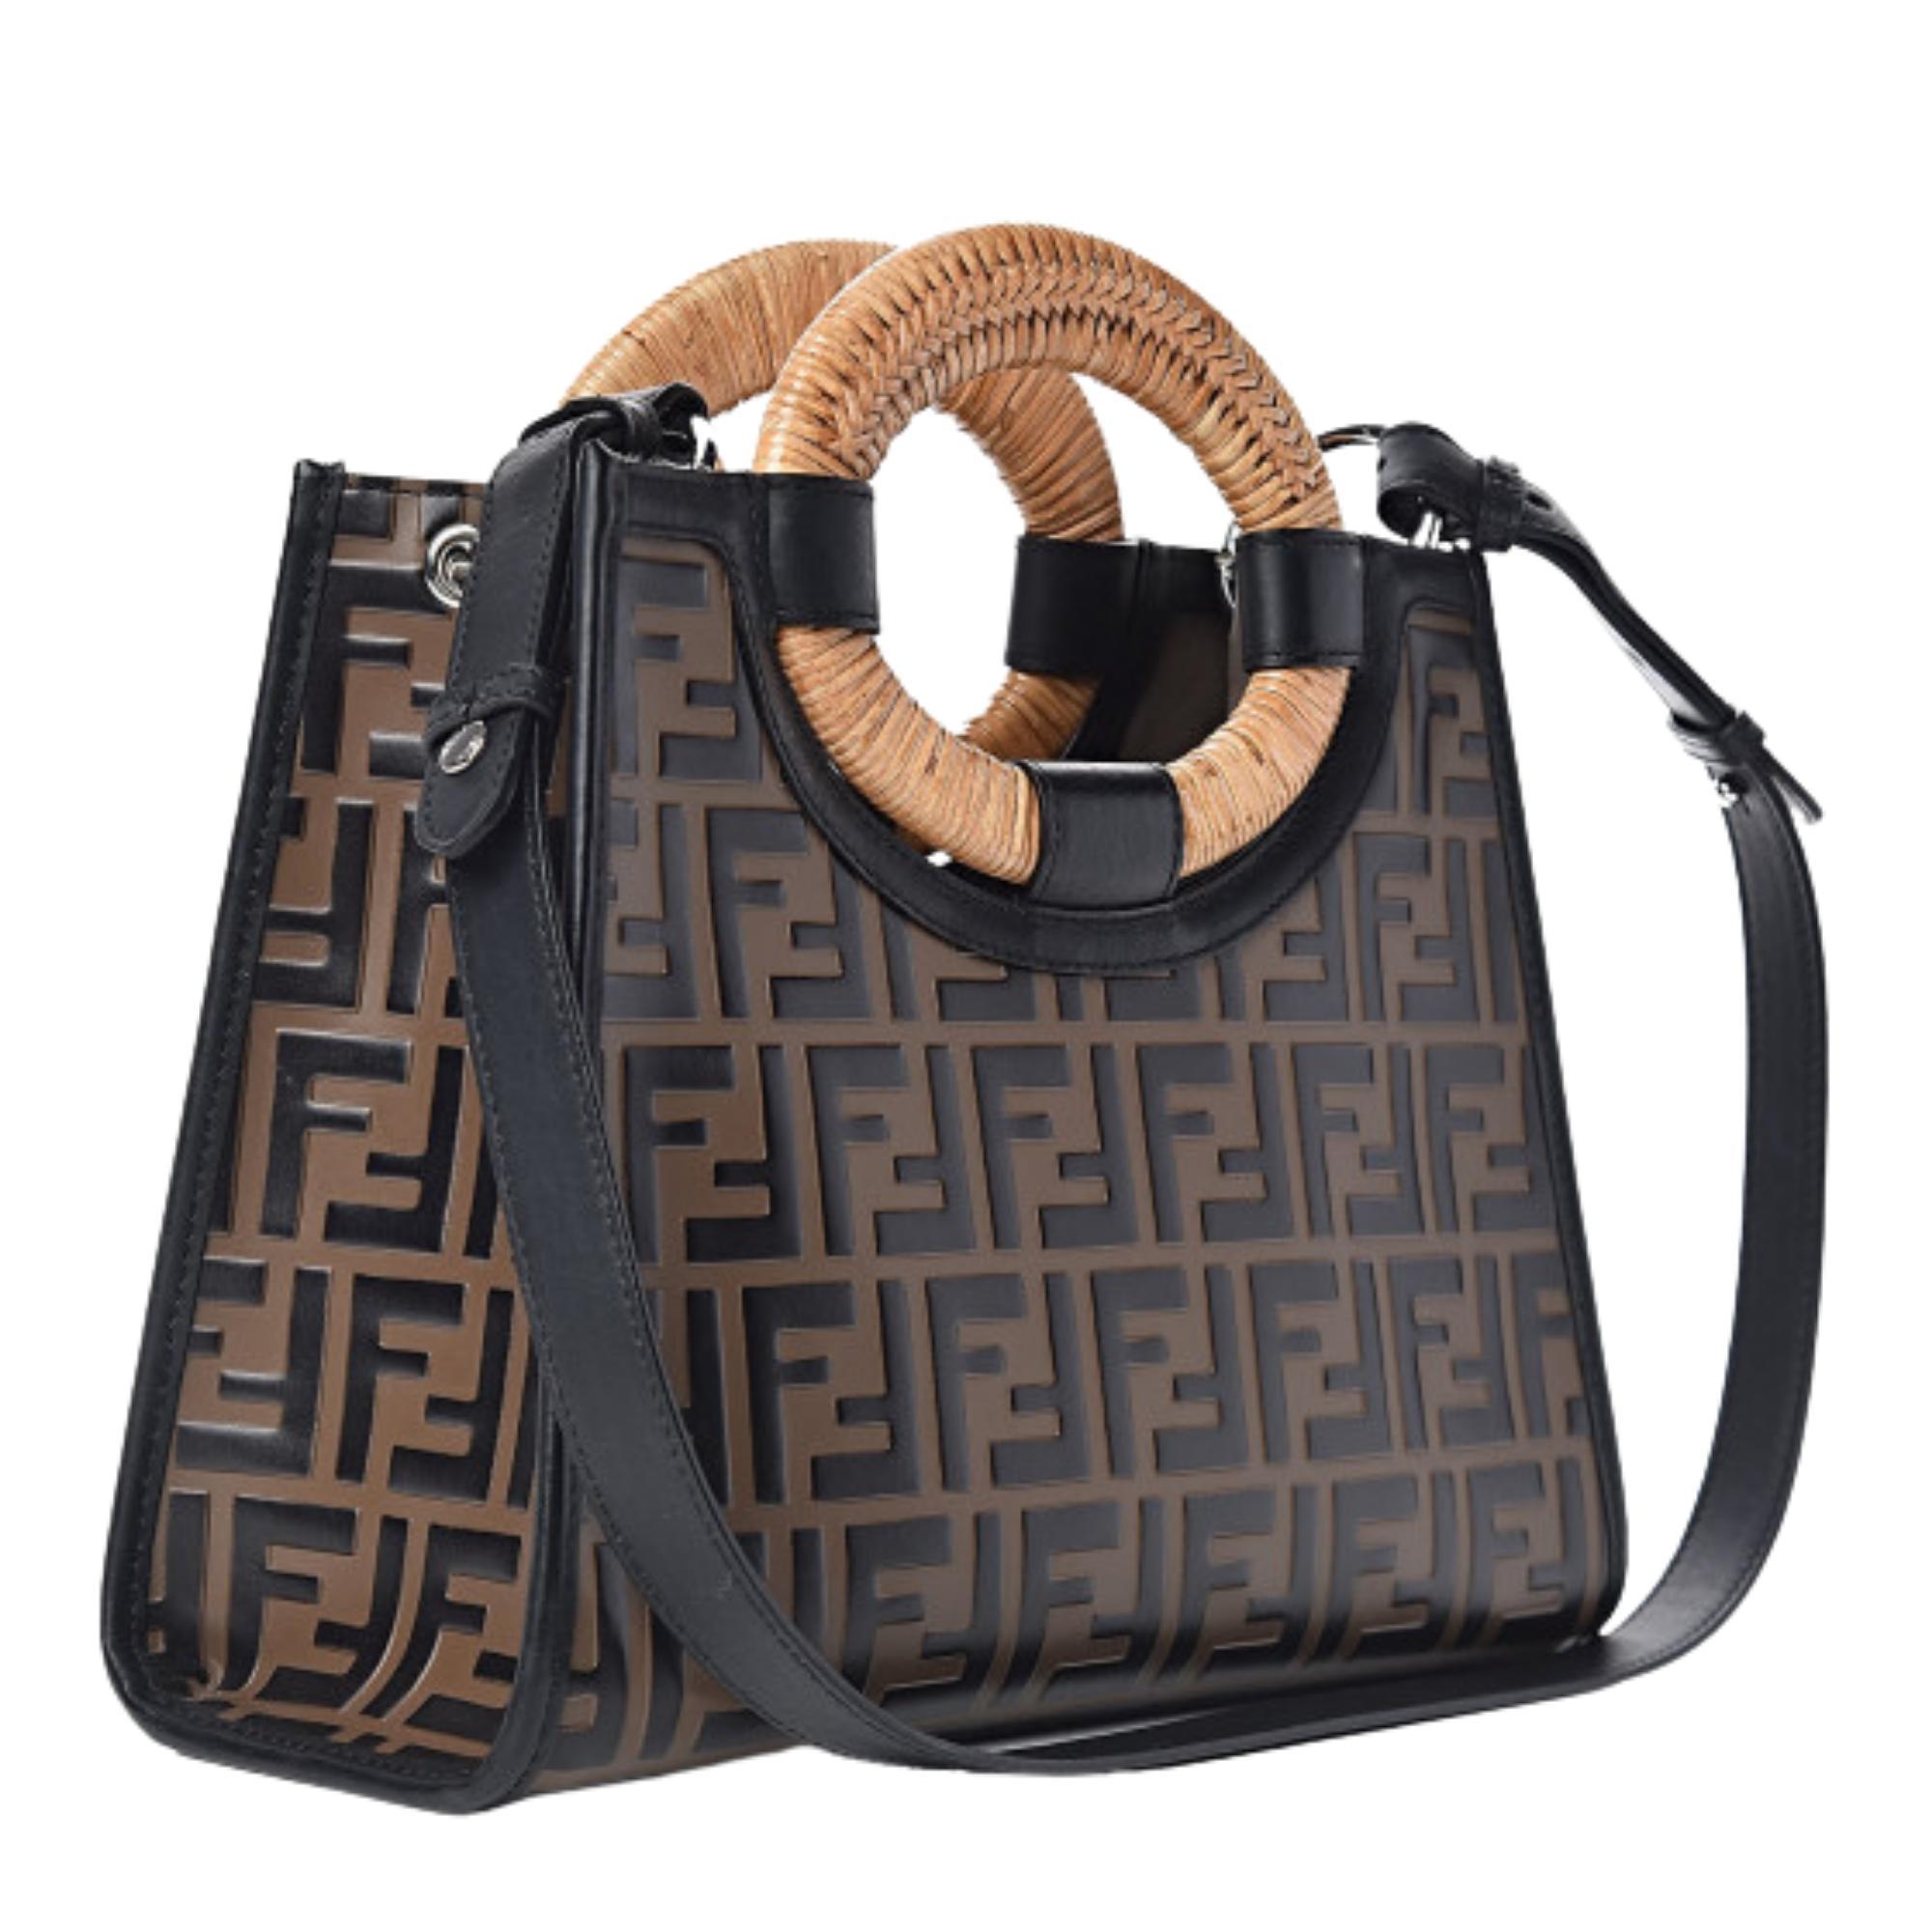 This tote is constructed with brown calfskin leather with black FF logo embossing and smooth black leather trim. The bag features dual large rounded wicker top handles with braided detail, an optional black leather shoulder strap, front zip pocket,